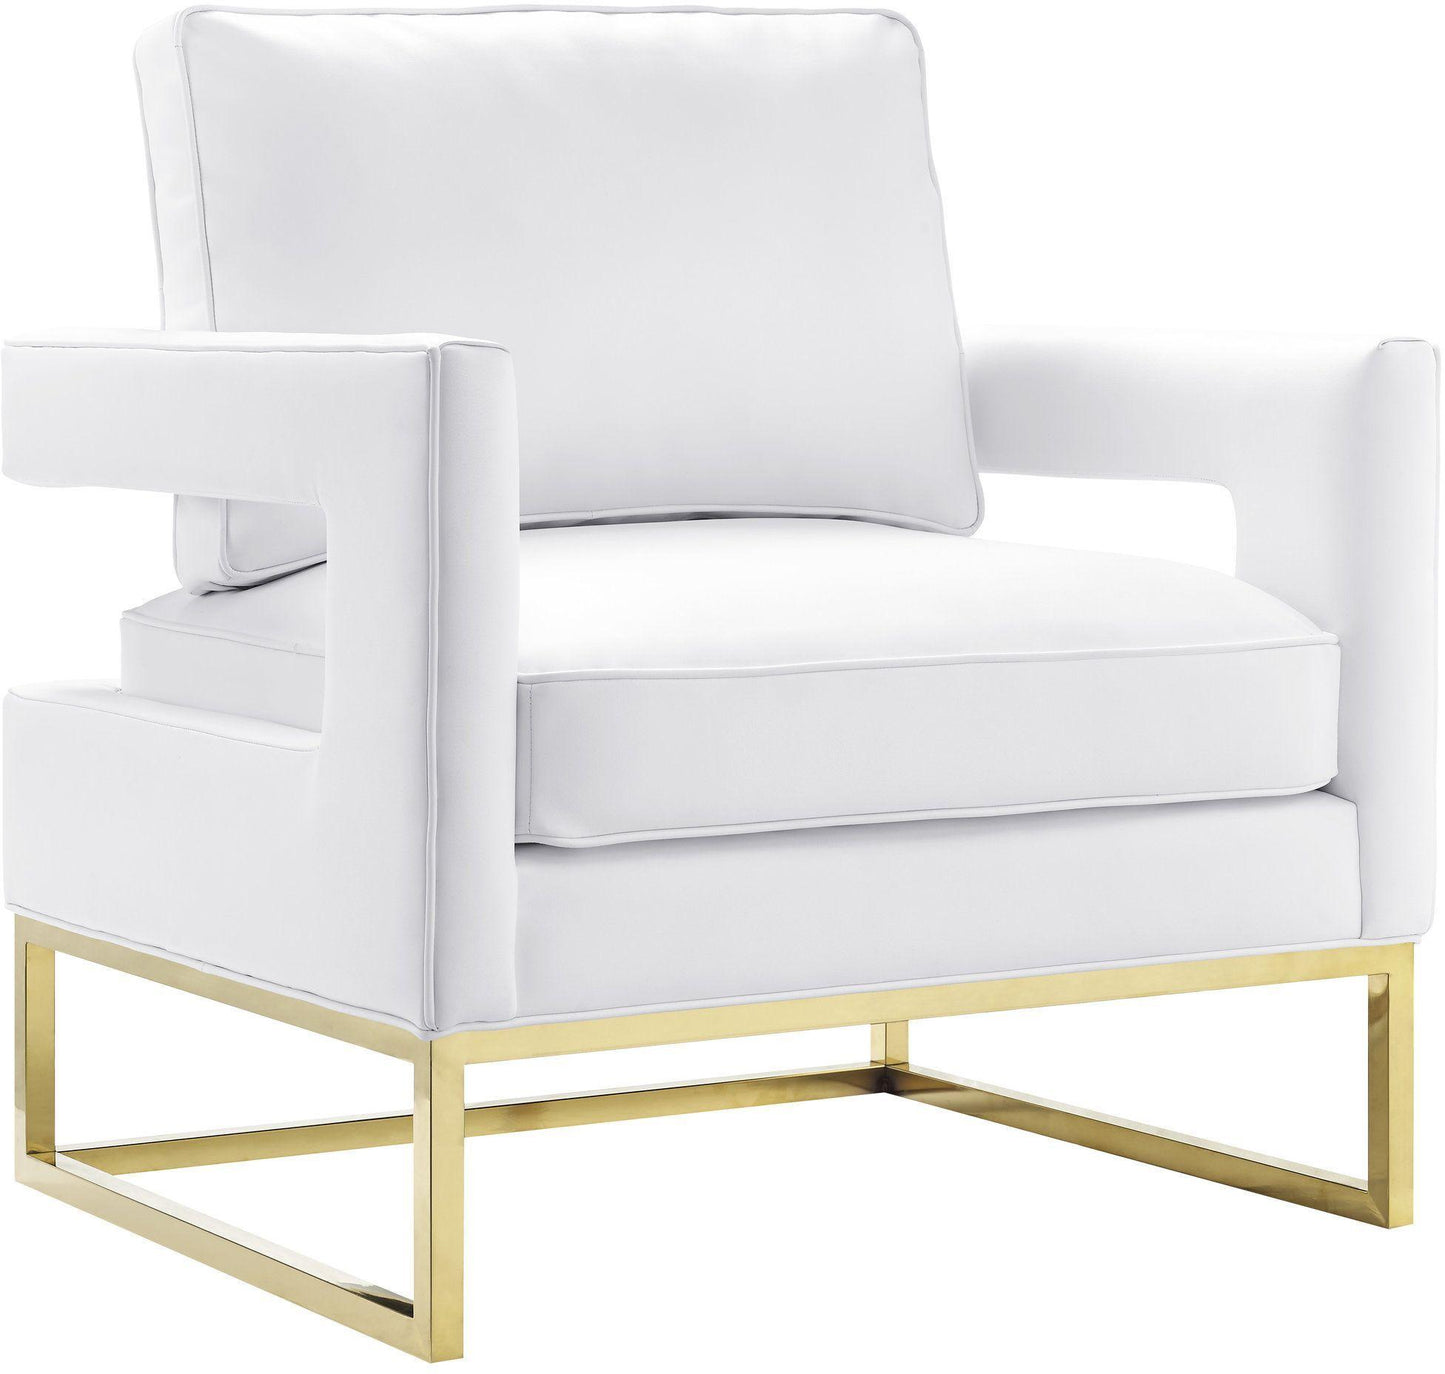 Tov Furniture Avery White Leather Chair